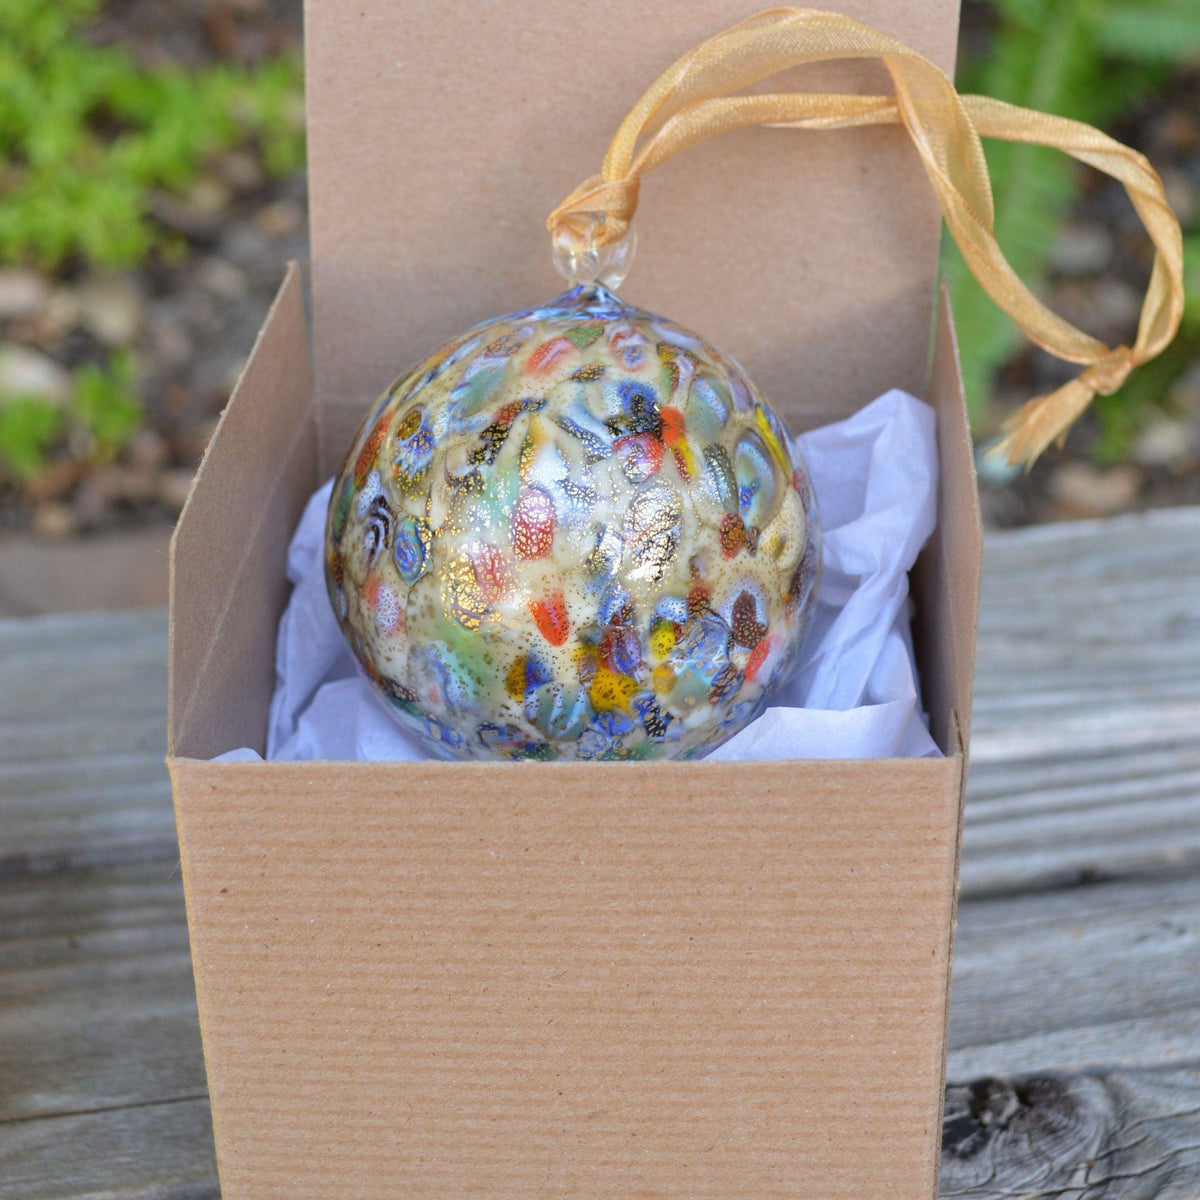 Murano Blown Glass Holiday Ornament with Spotted Macchia Accents, Made in Murano, Italy at MyItalianDecor